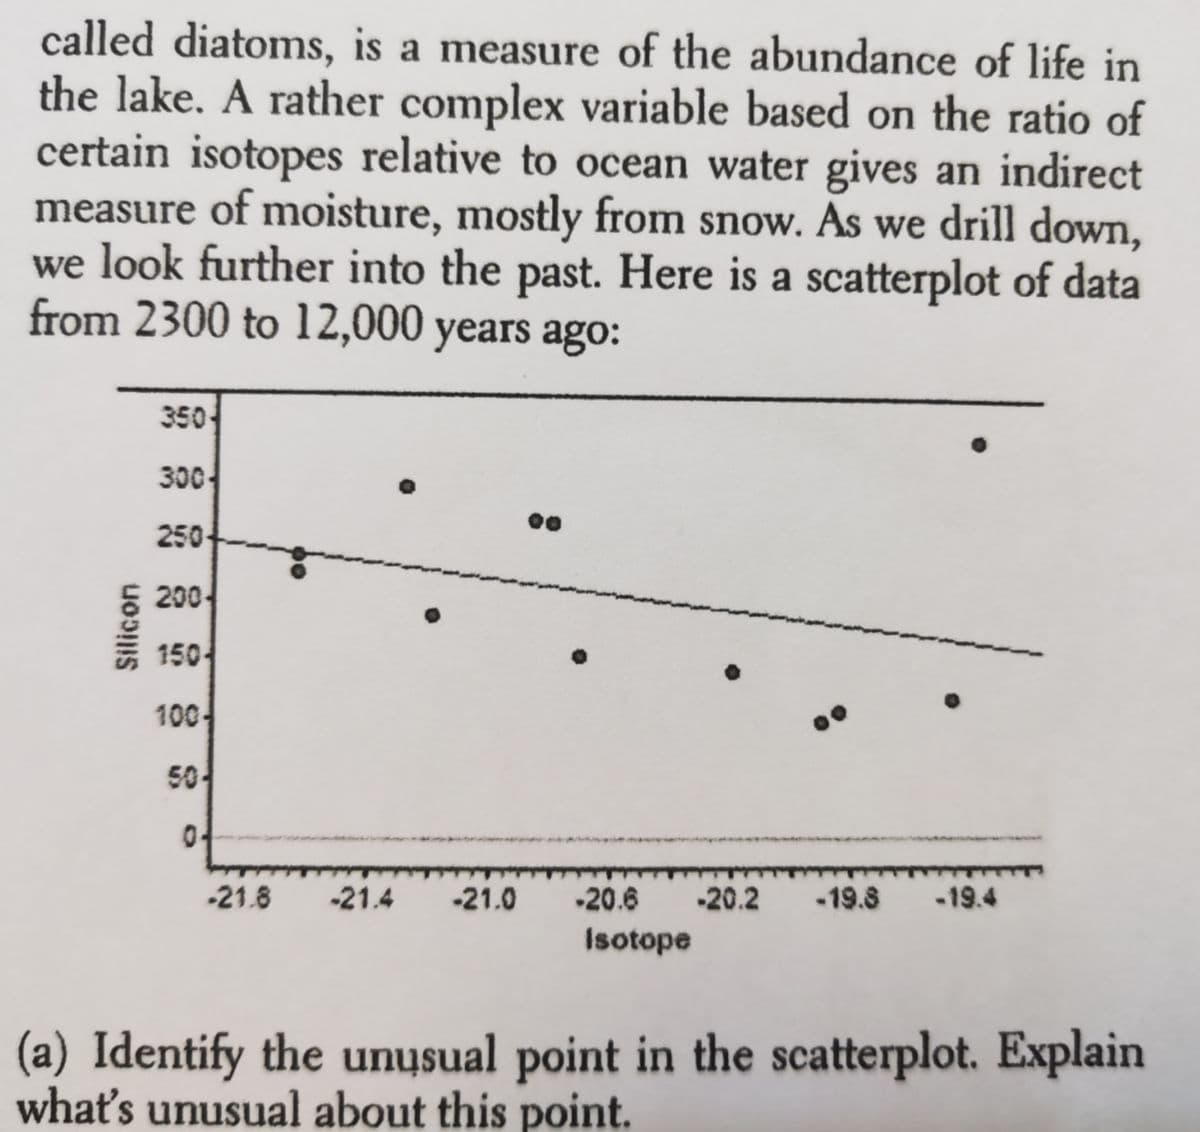 called diatoms, is a measure of the abundance of life in
the lake. A rather complex variable based on the ratio of
certain isotopes relative to ocean water gives an indirect
measure of moisture, mostly from snow. As we drill down,
we look further into the past. Here is a scatterplot of data
from 2300 to 12,000 years ago:
350
300-
250
200
150
100-
50
0-
-21.8
-21.4
-21.0
20.6
-20.2 -19.8 19.4
Isotope
(a) Identify the unųsual point in the scatterplot. Explain
what's unusual about this point.
Silicon
